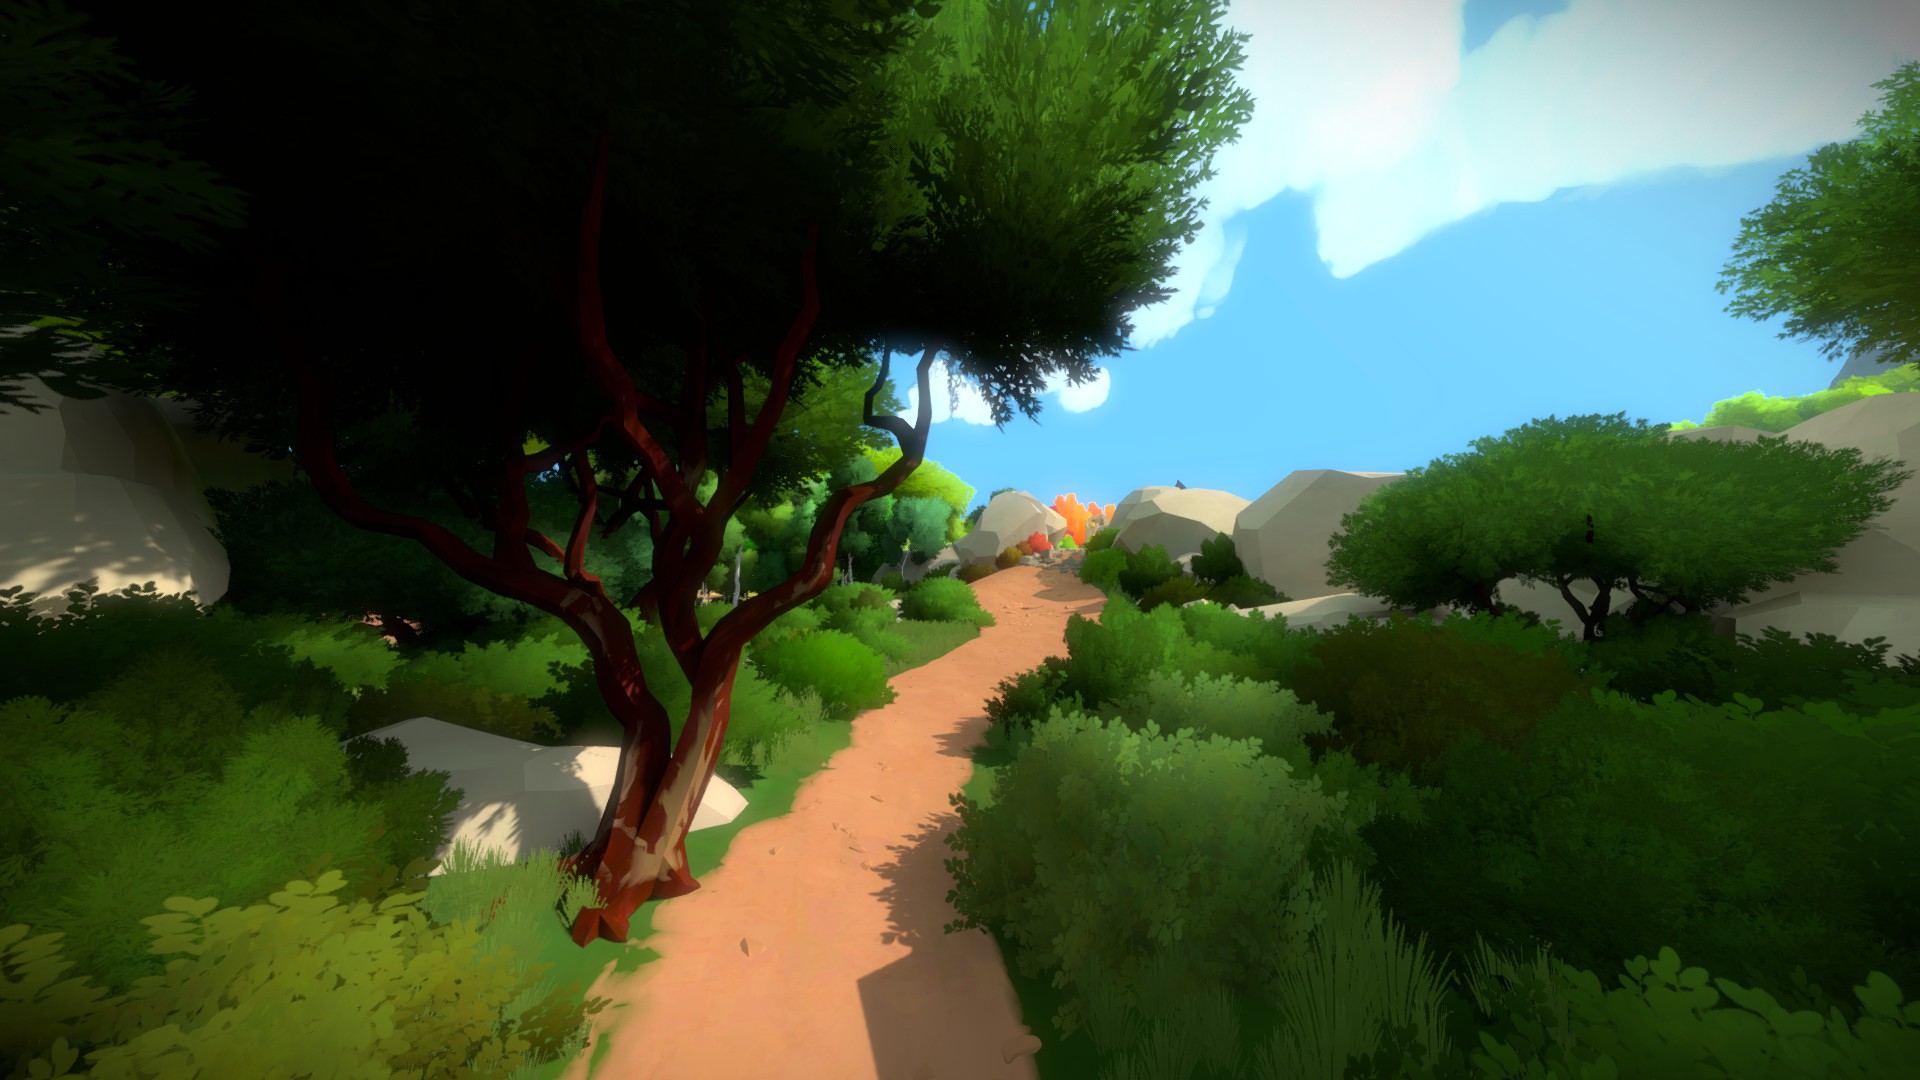 The path outside of Castle: a gentle dirt slope upwards towards a bright vista.